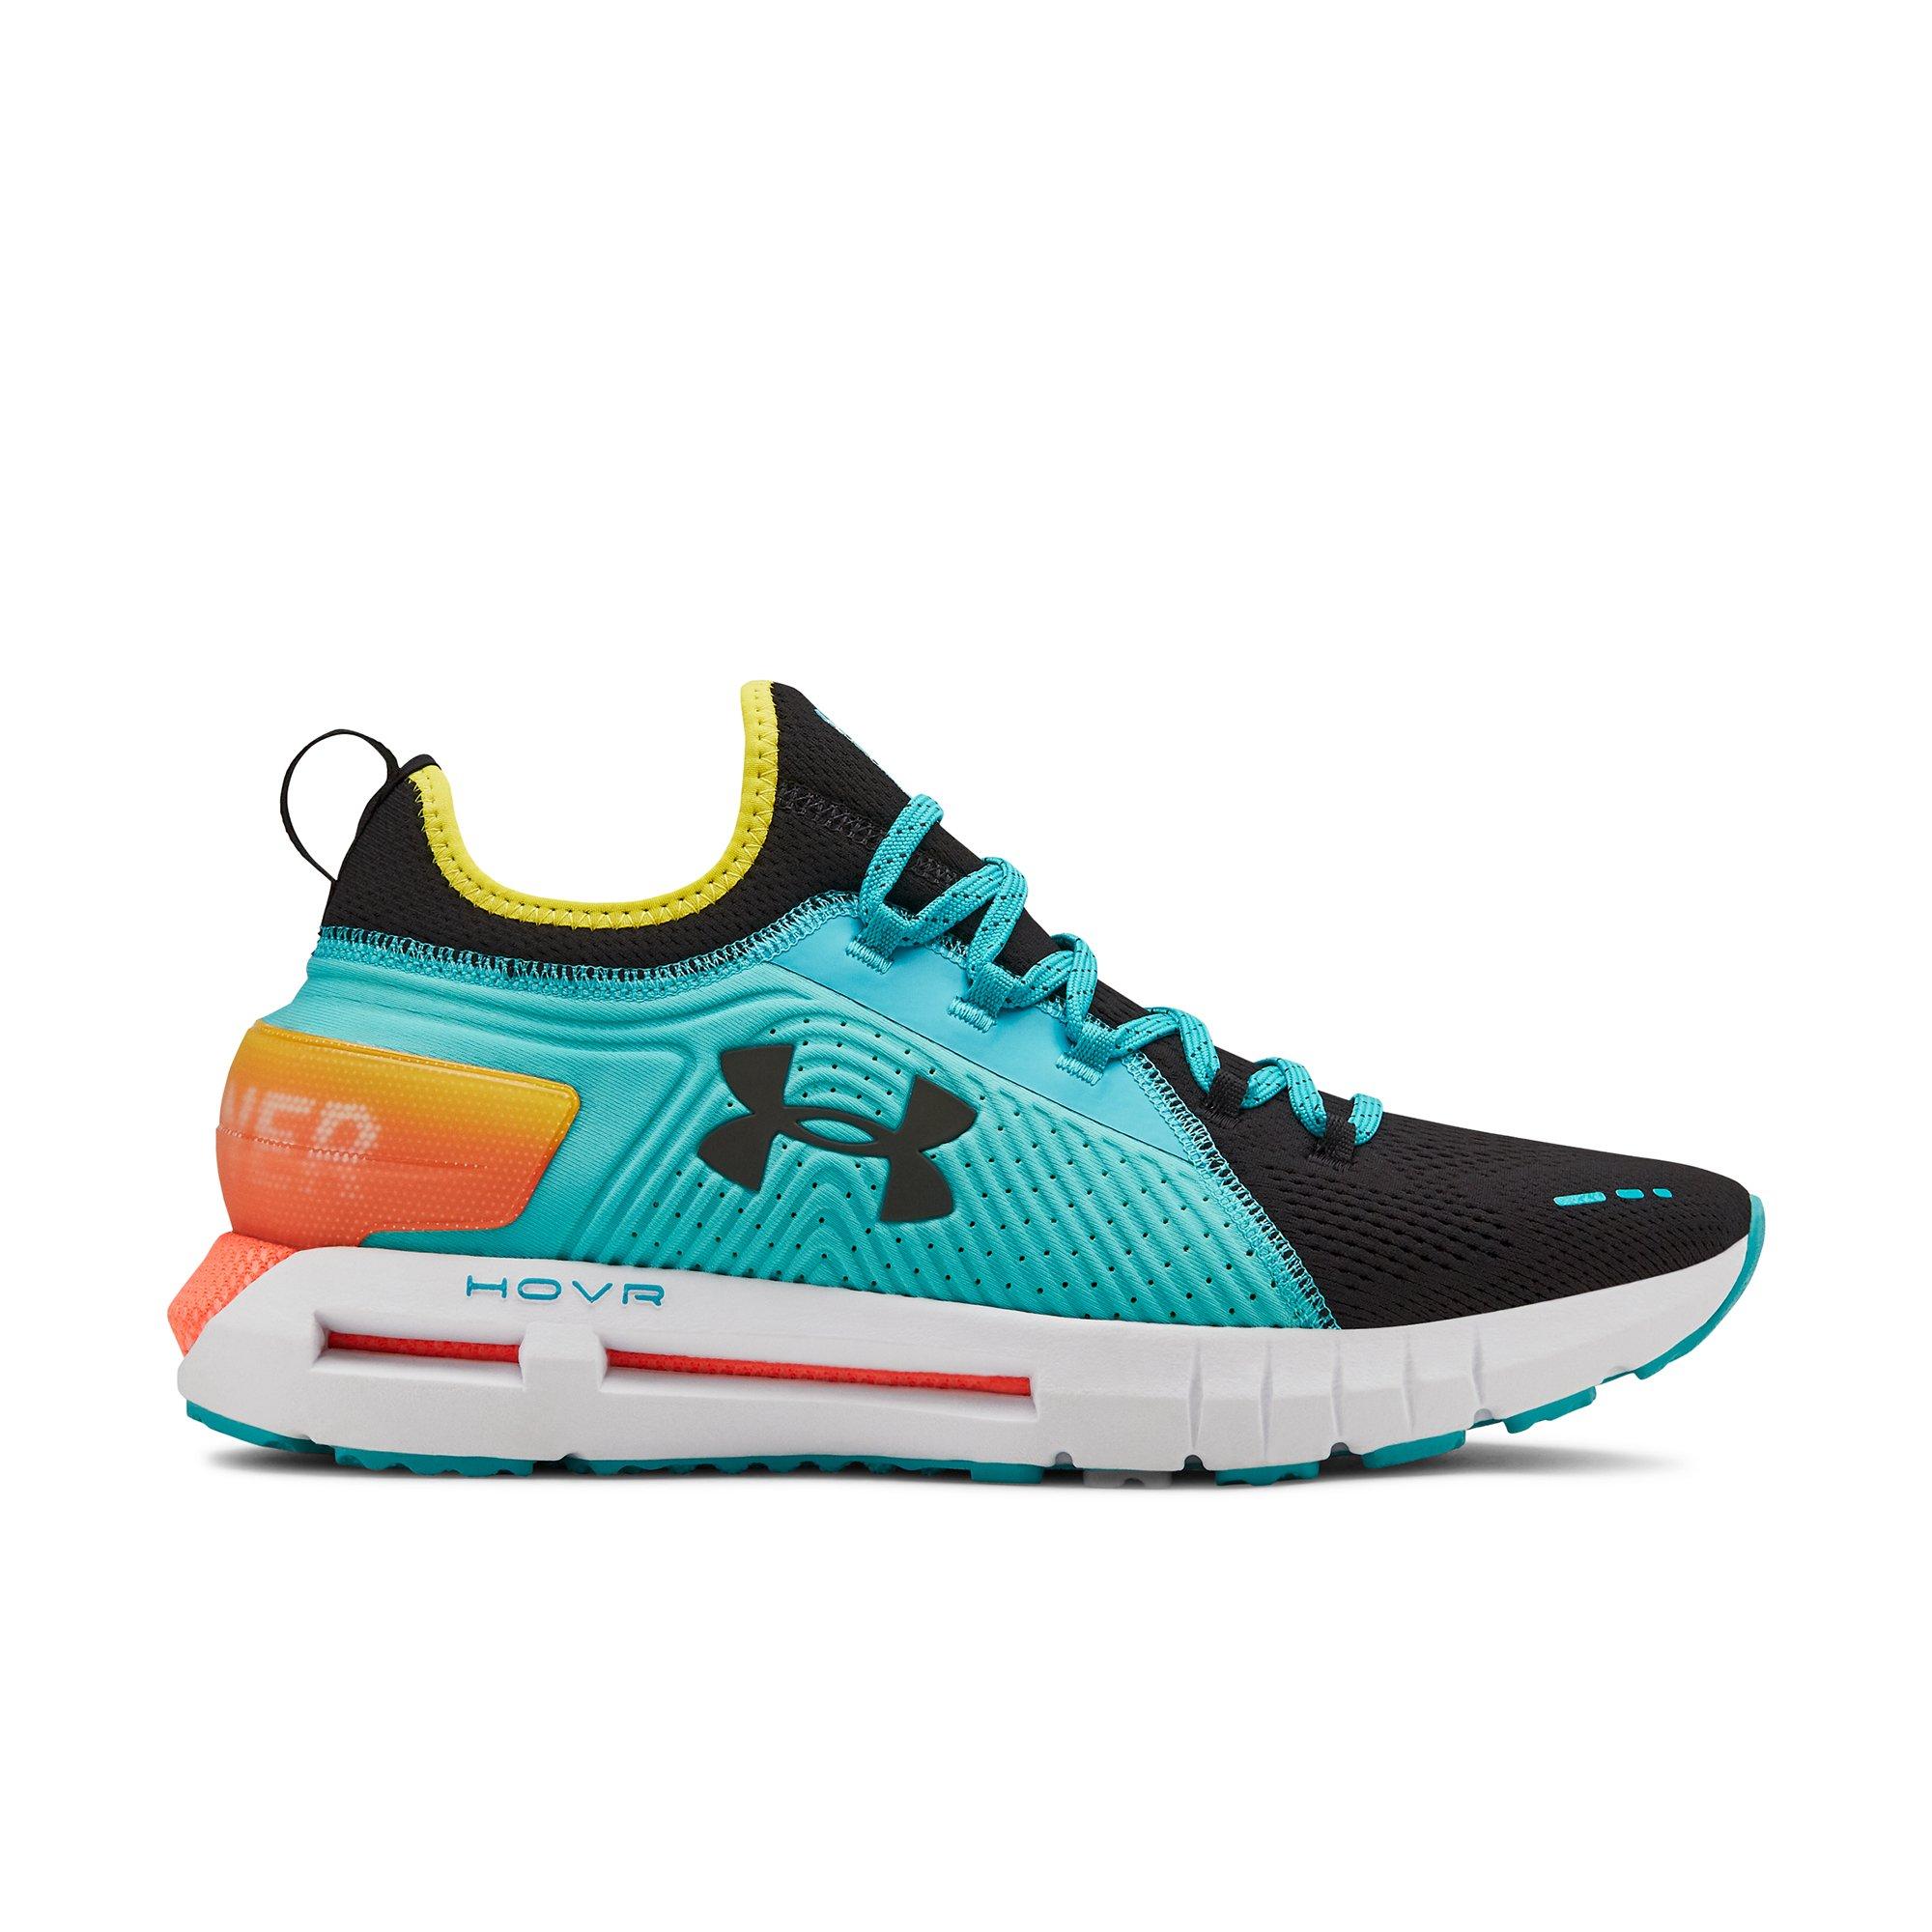 teal under armour shoes